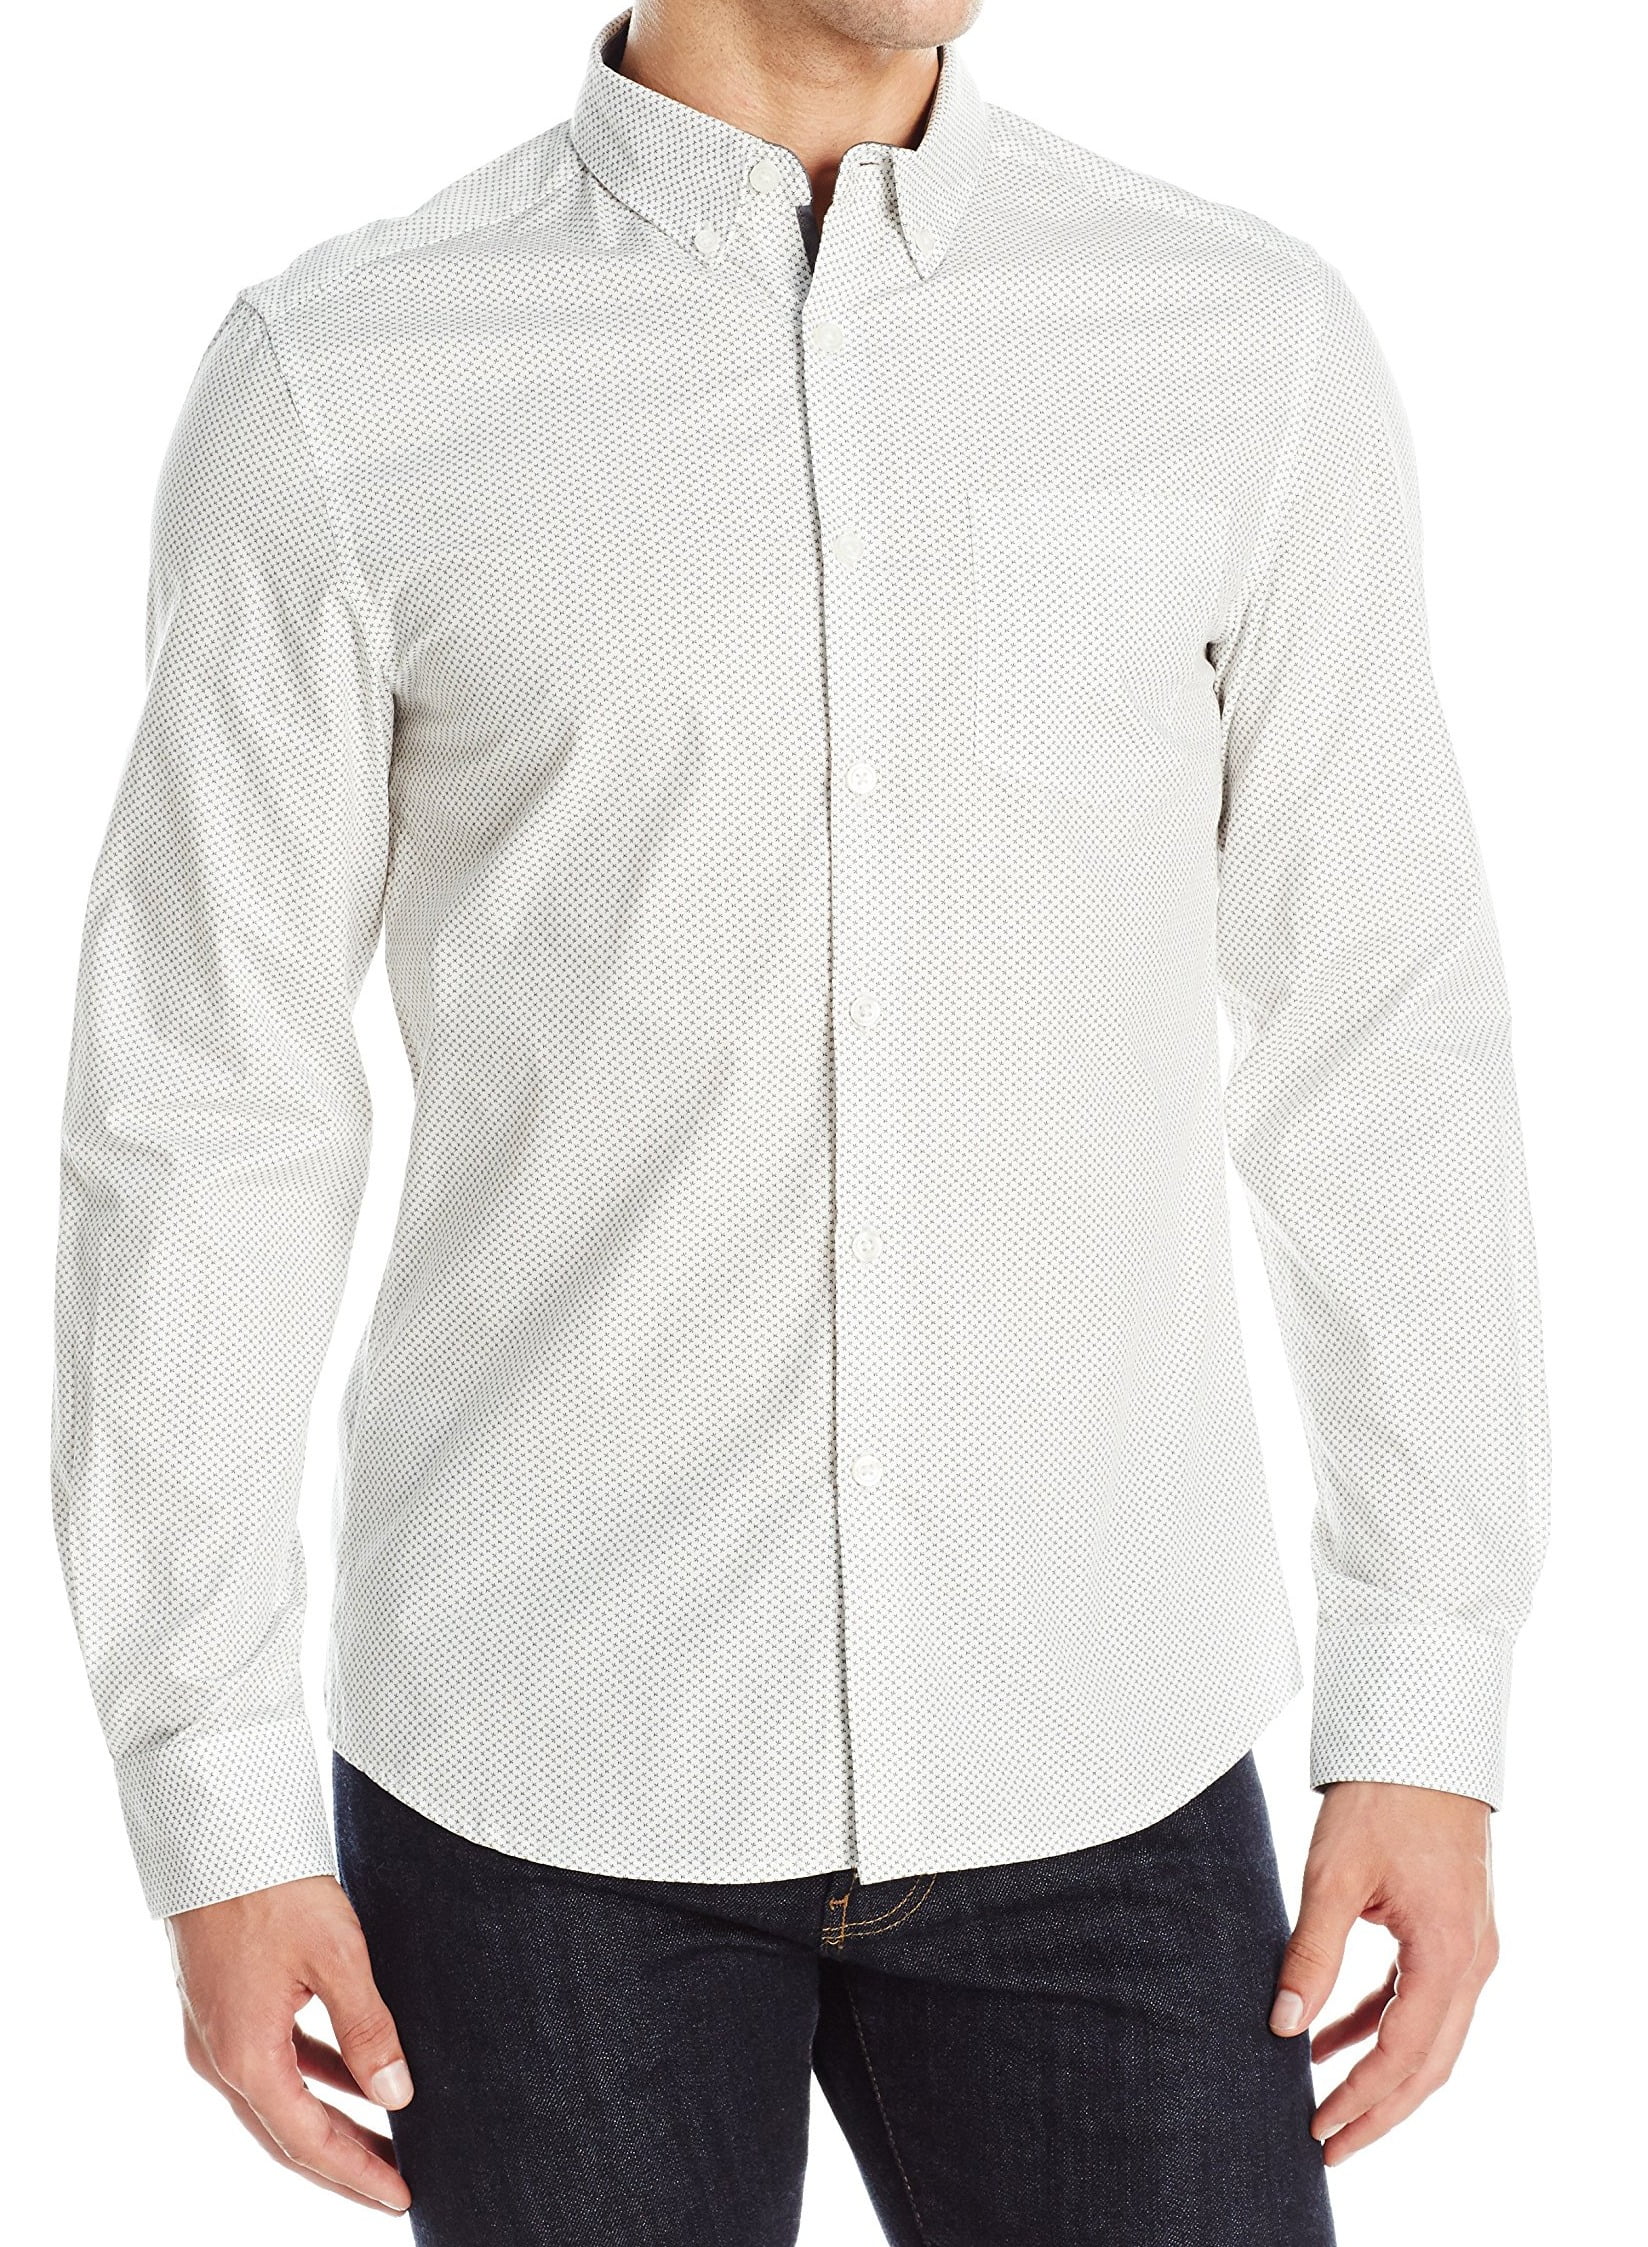 Kenneth Cole - Kenneth Cole NEW White Mens Size XL Printed Slim-Fit ...